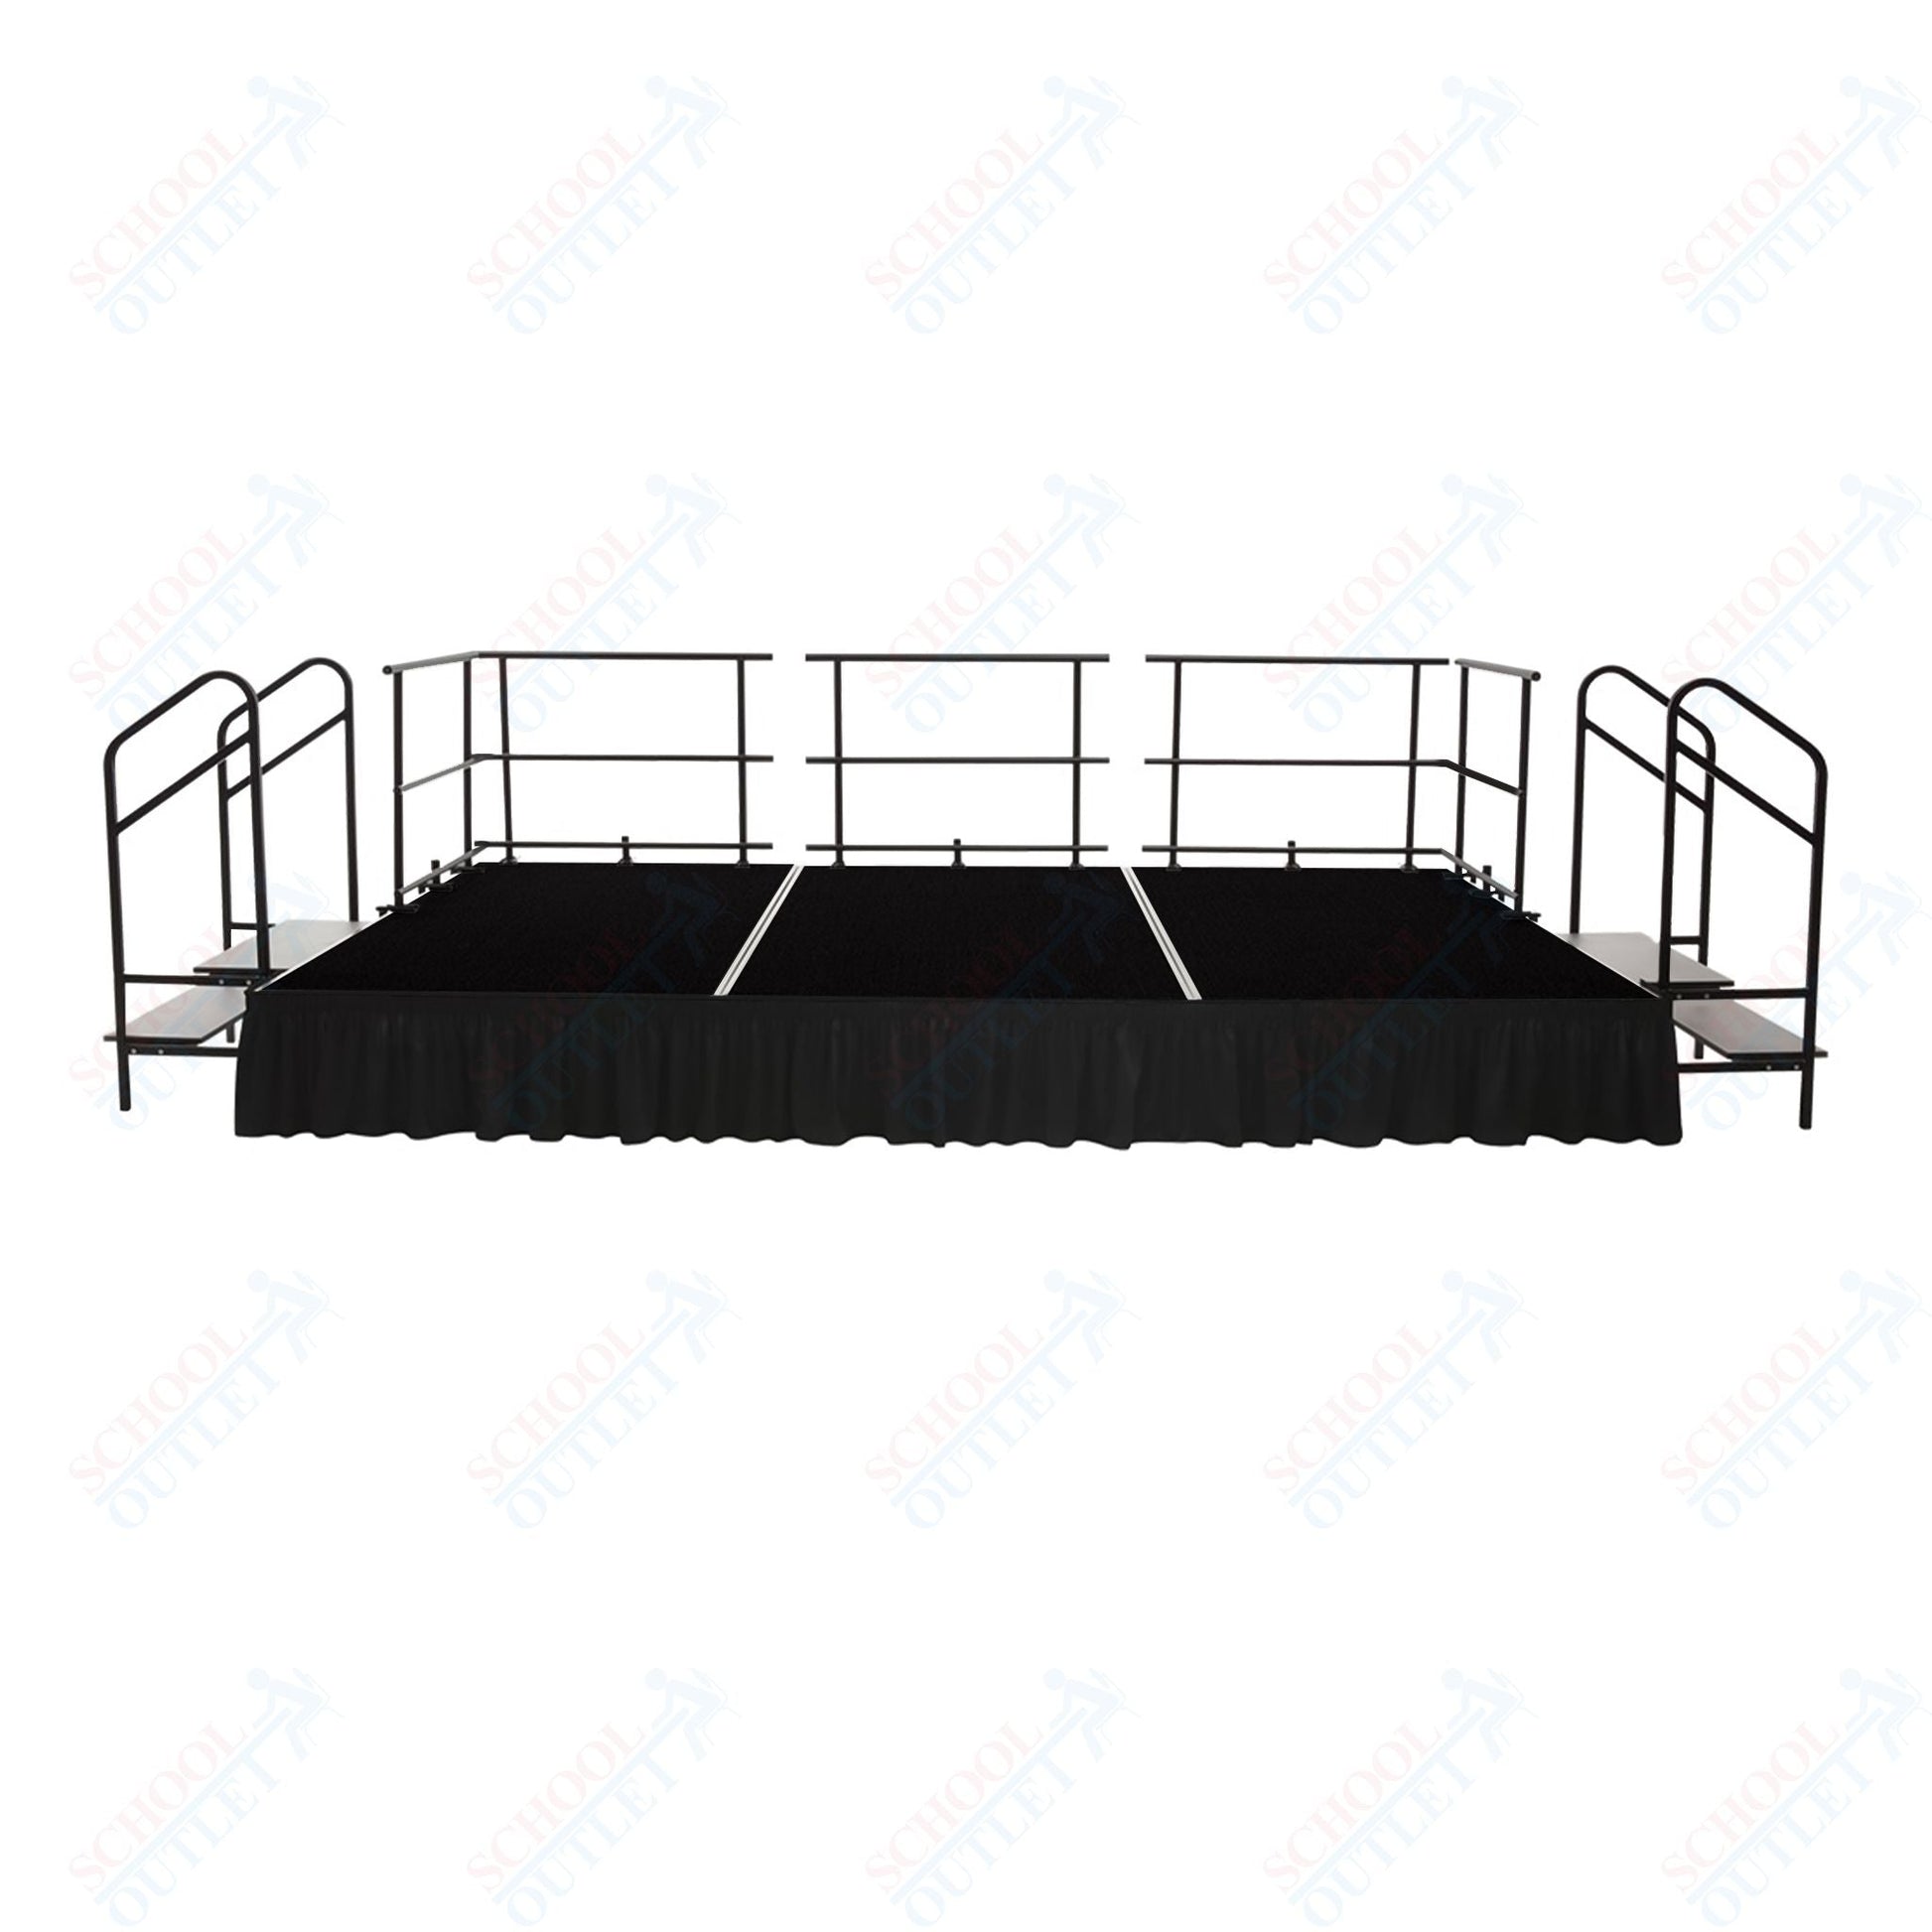 AmTab Fixed Height Stage Set - Polypropylene Top - 16'W x 32'L x 2'H (192"W x 384"L x 24"H) (AmTab AMT - STS163224P) - SchoolOutlet